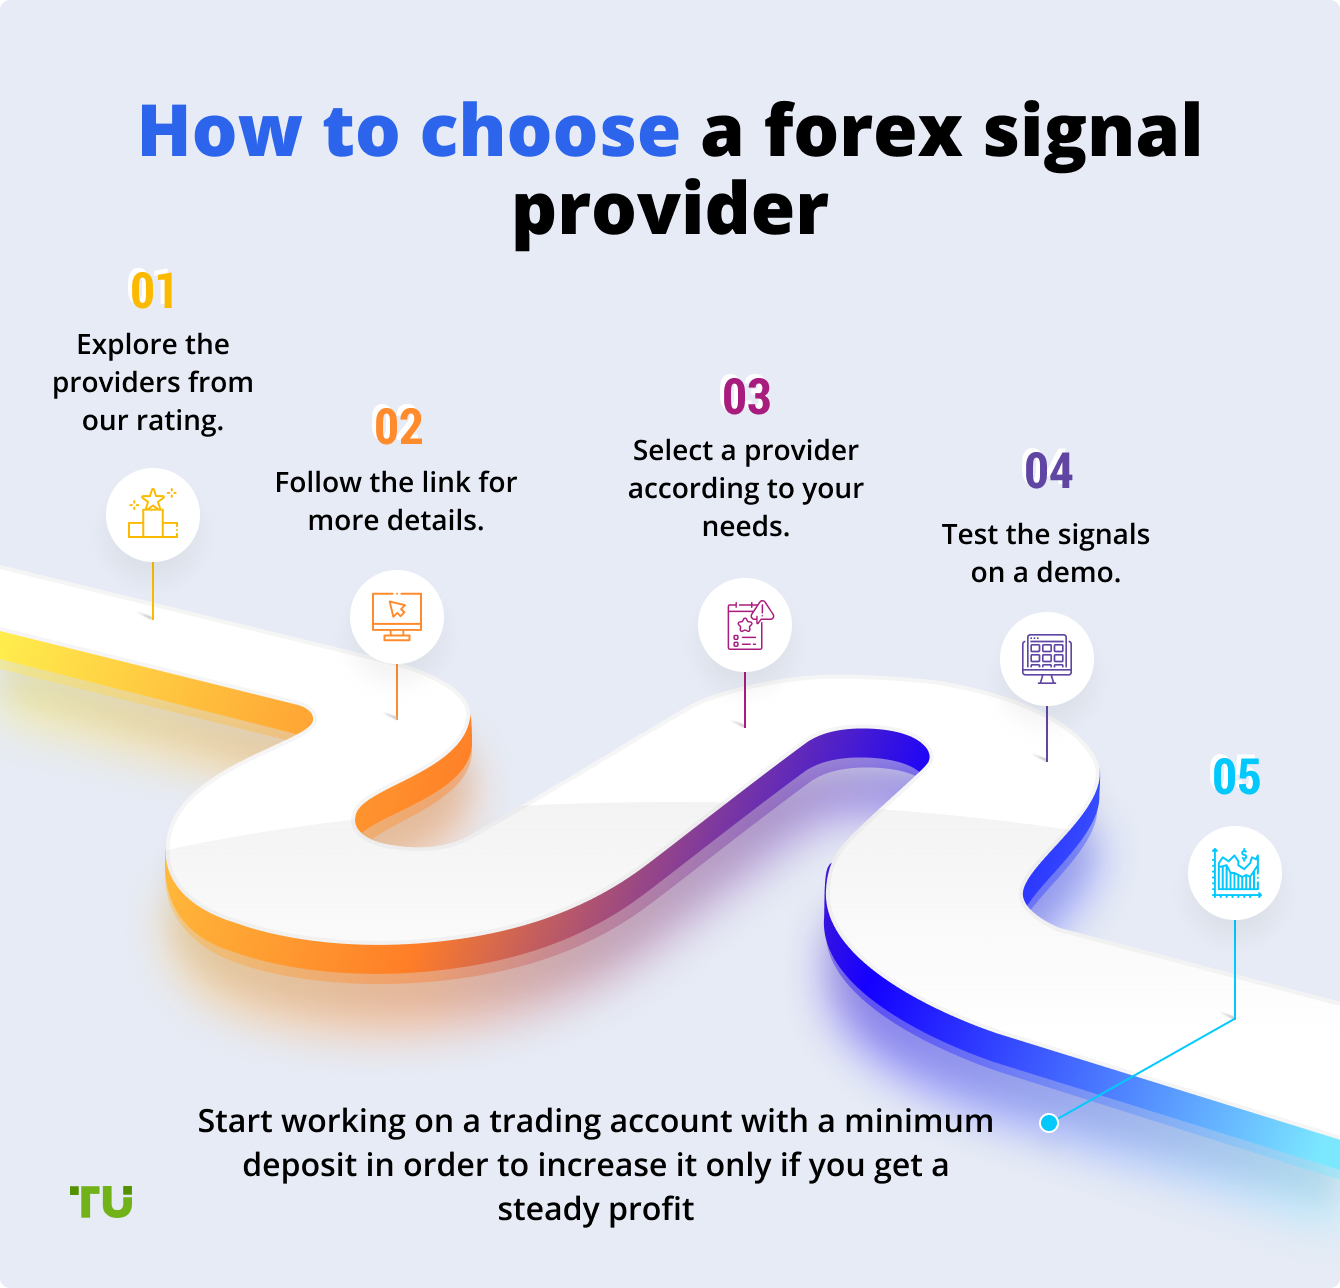 Forex signal providers in nigeria forex trading in india illegal immigrants